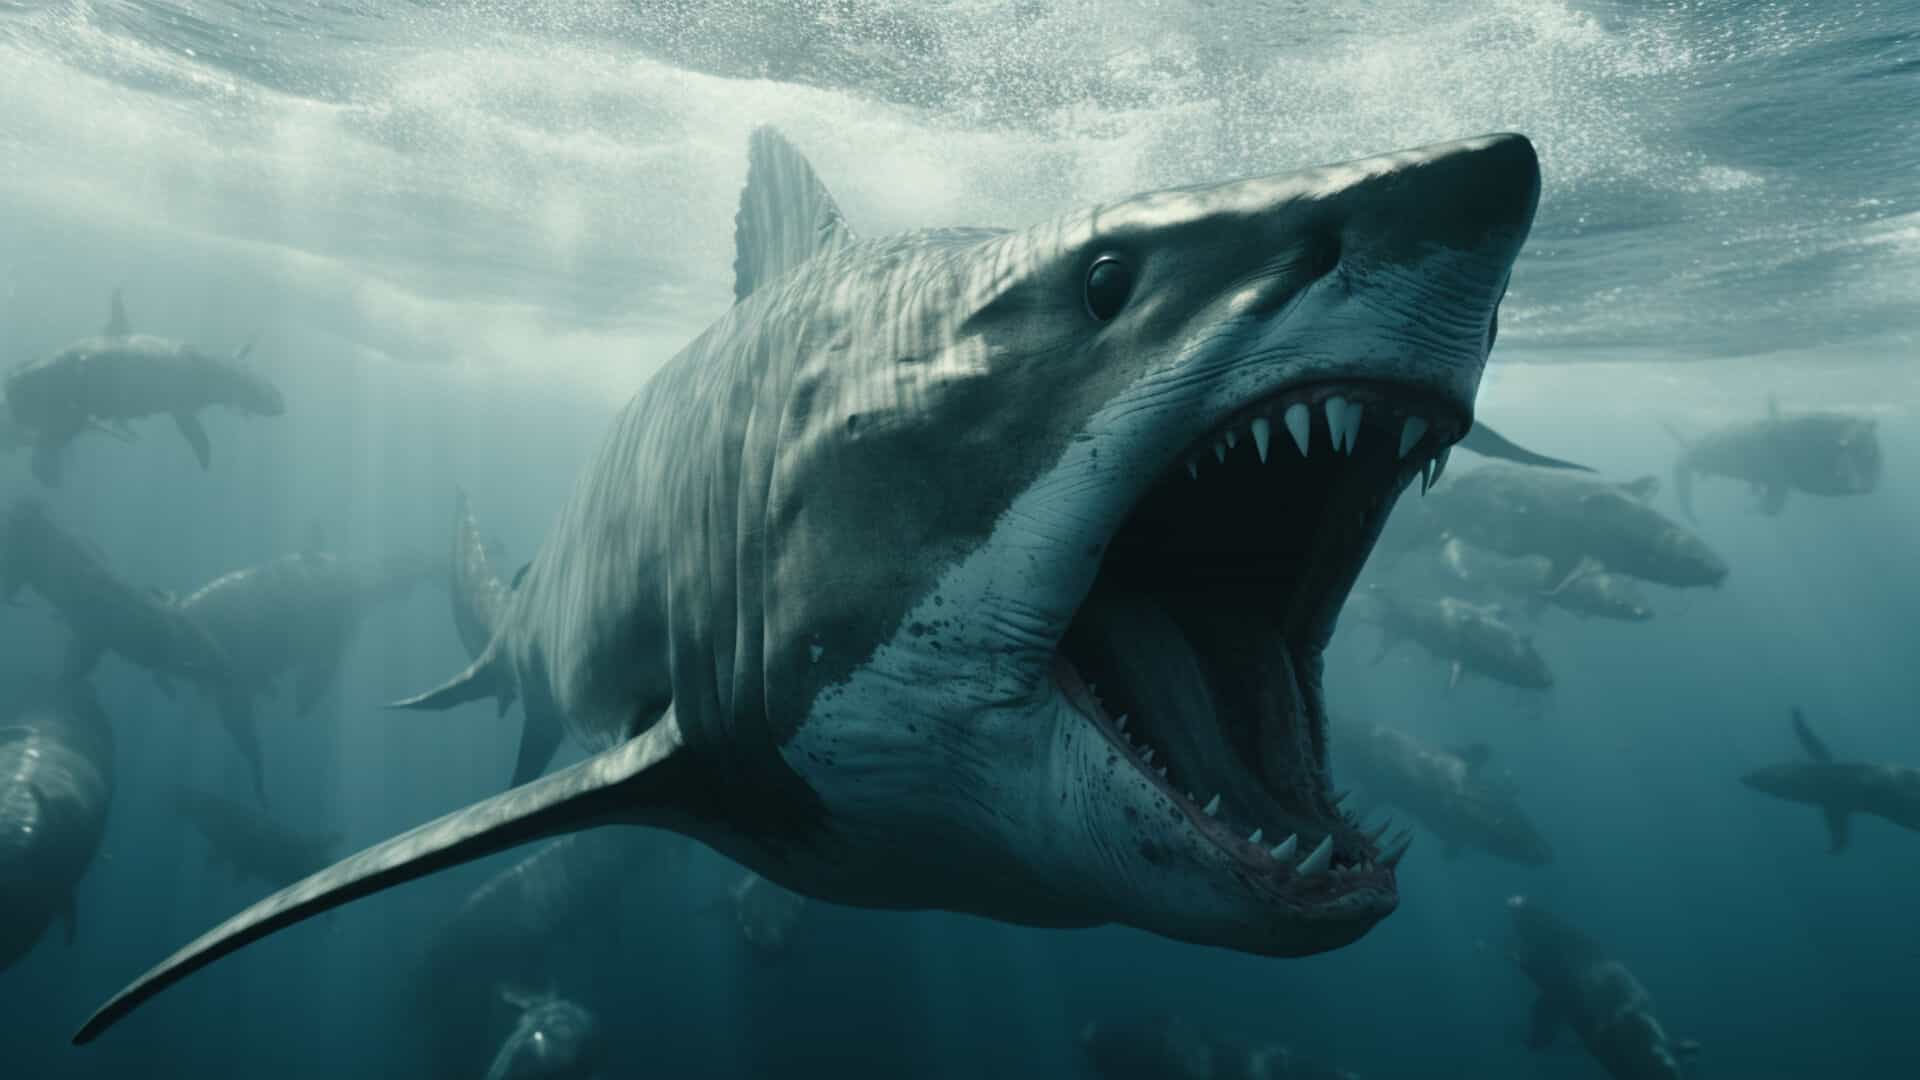 OceanGate Titan Submersible Incident as a Metaphor for Real Estate Investing (Risk, Reward, and Adventure) underwater closeup of shark with mouth wide open, many sharks in background